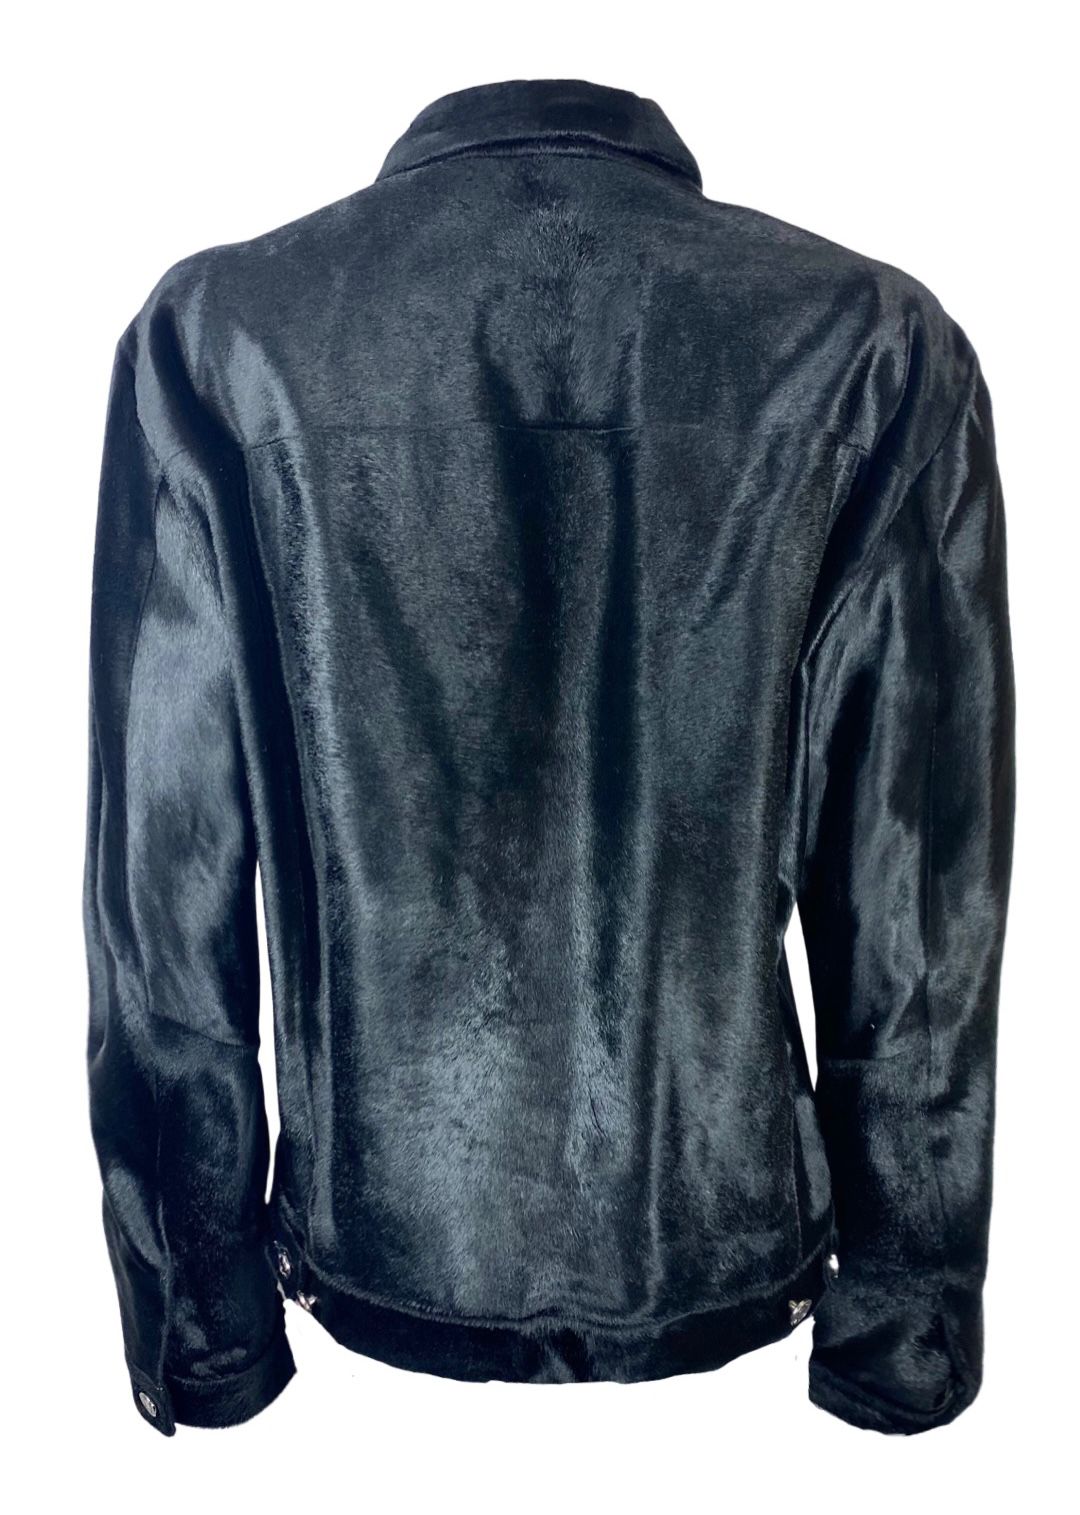 BLOOD BROTHER Black Calf Hair Leather Jean Style Jacket (M)-The Freperie